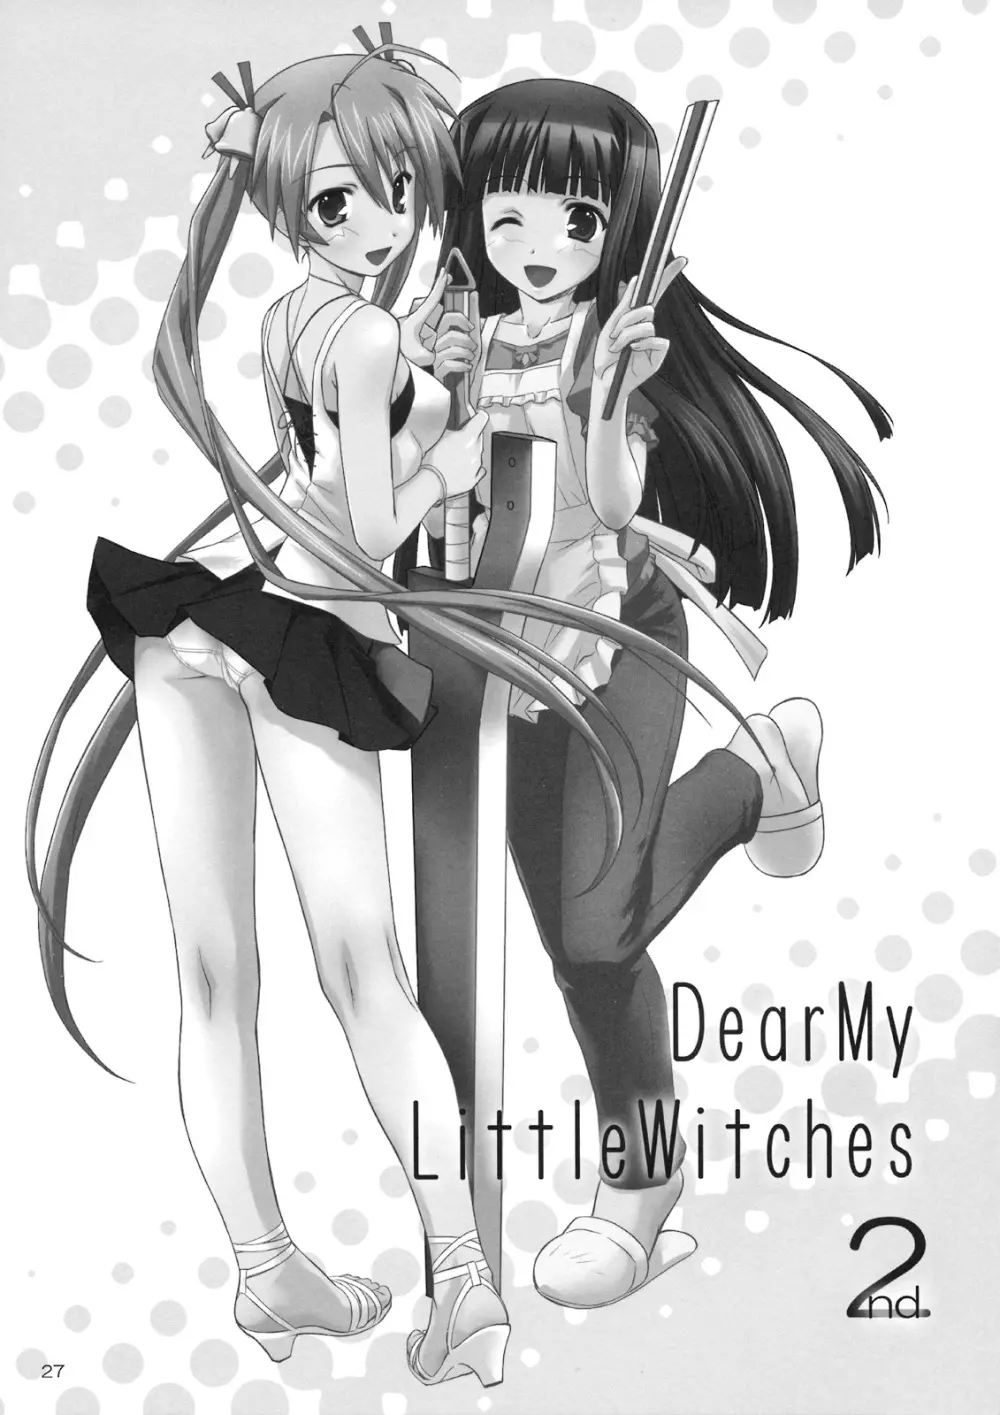 Dear My Little Witches 2nd 26ページ